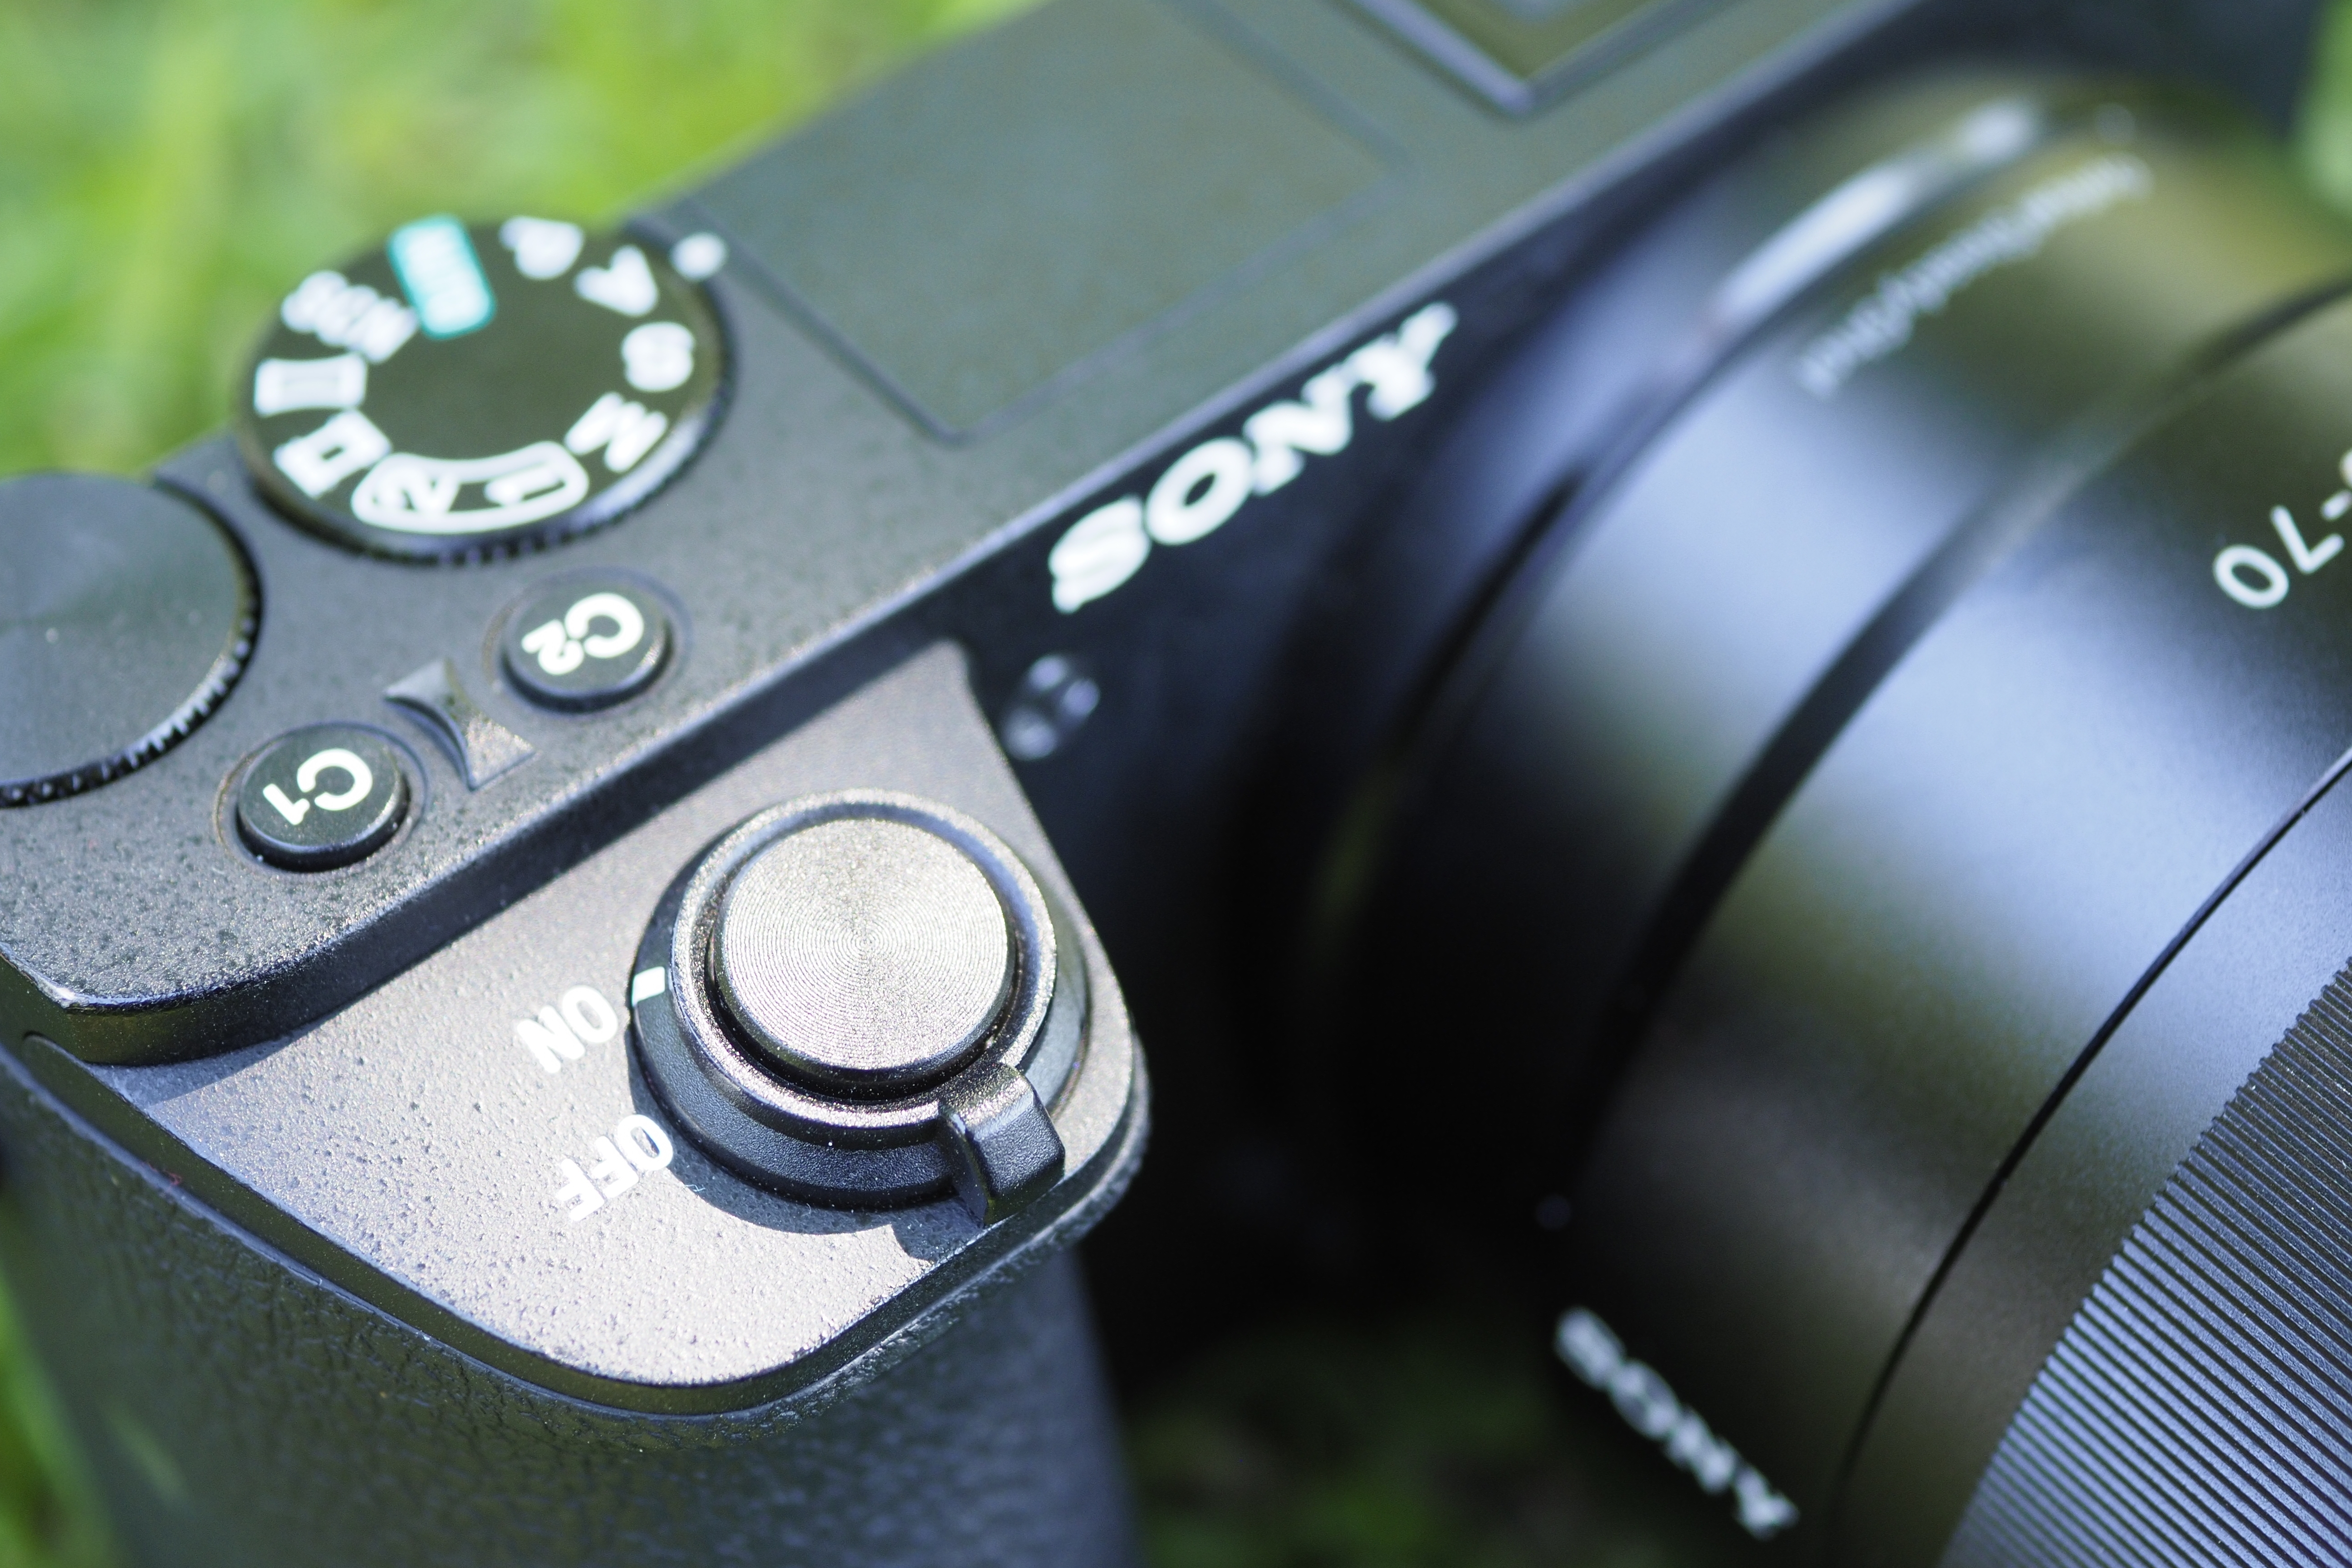 Sony A6500 design: boxy and utilitarian, with a chunky grip 